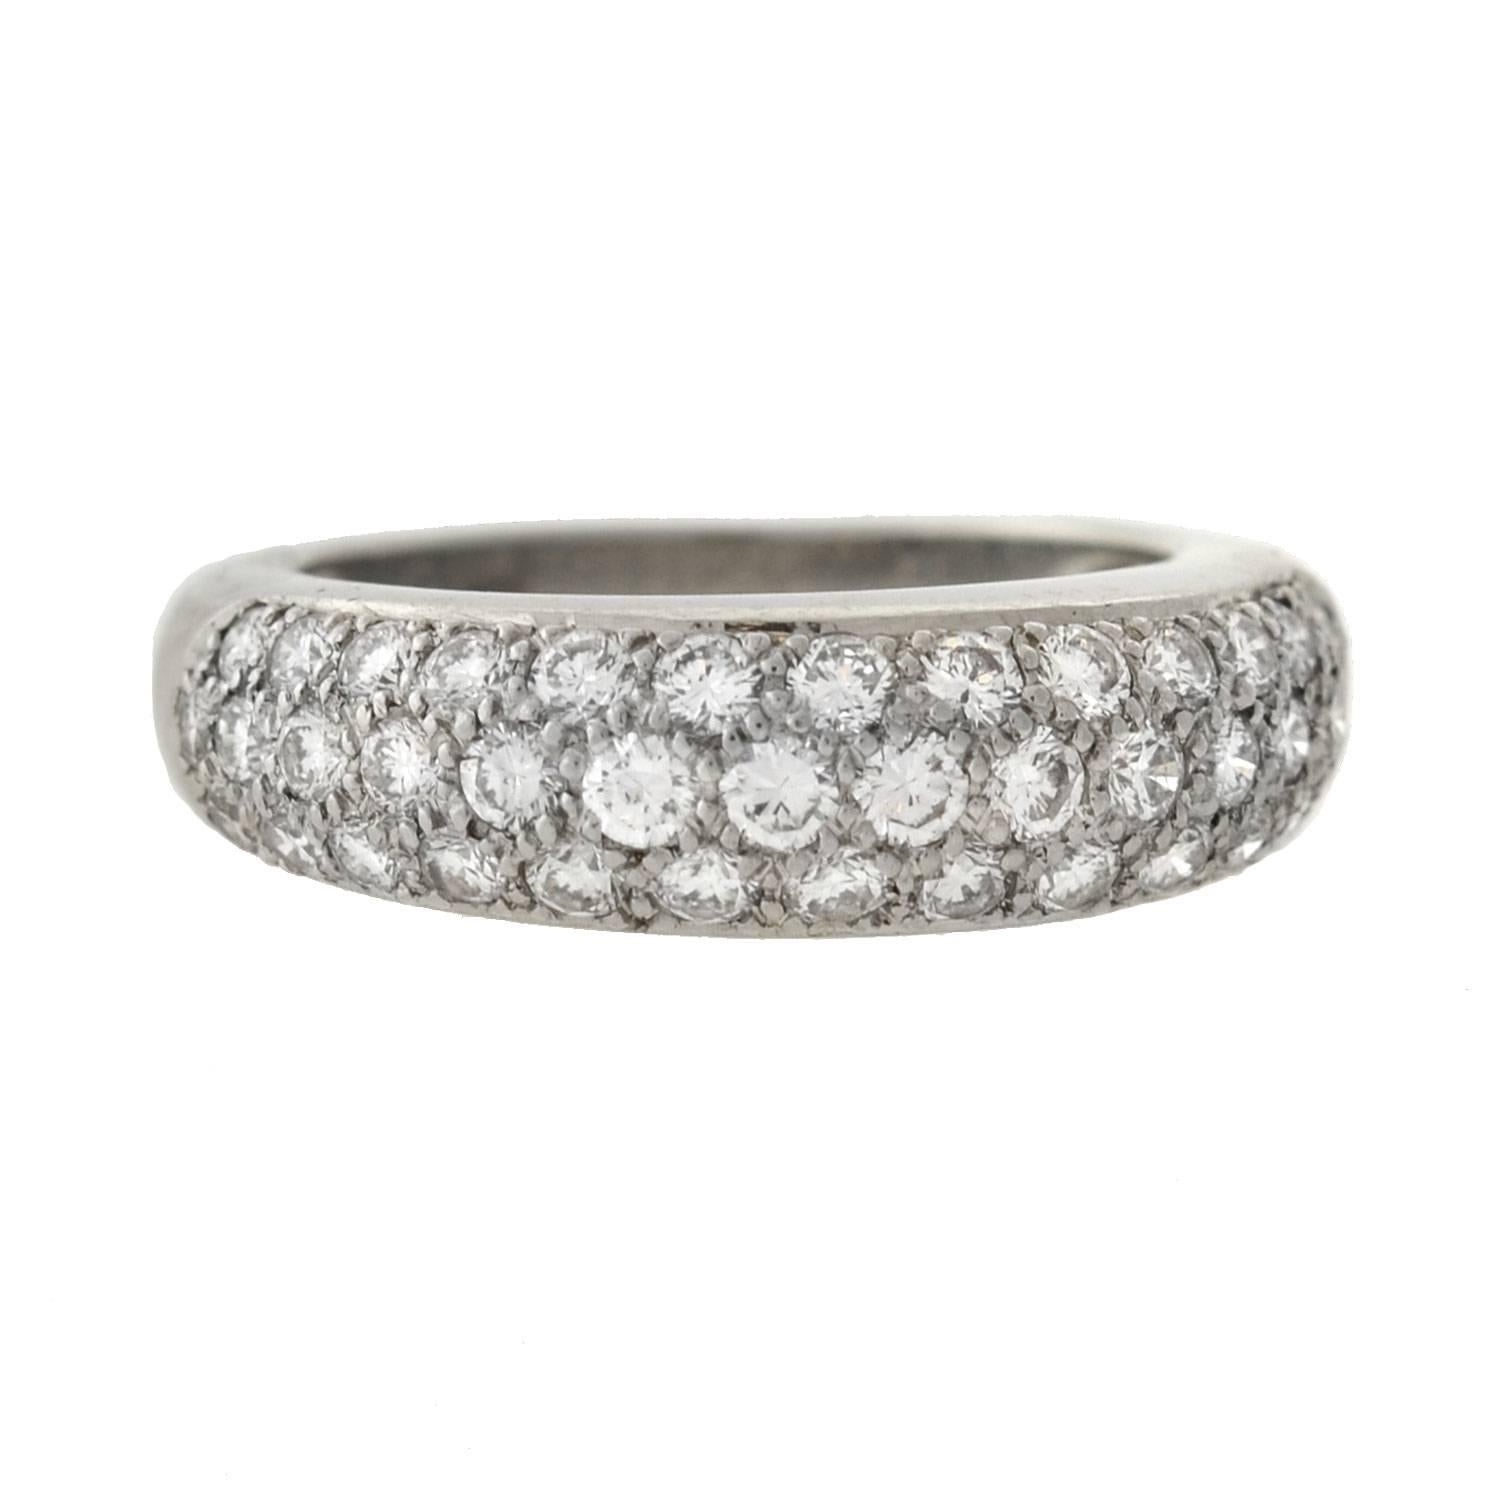 A stunning Vintage pavé diamond ring by legendary maker Cartier! From circa 1995, this wonderful piece is made of platinum and displays 3 glittering rows of diamonds. The band has 40 sparkling brilliant cut diamonds, which have a total overall